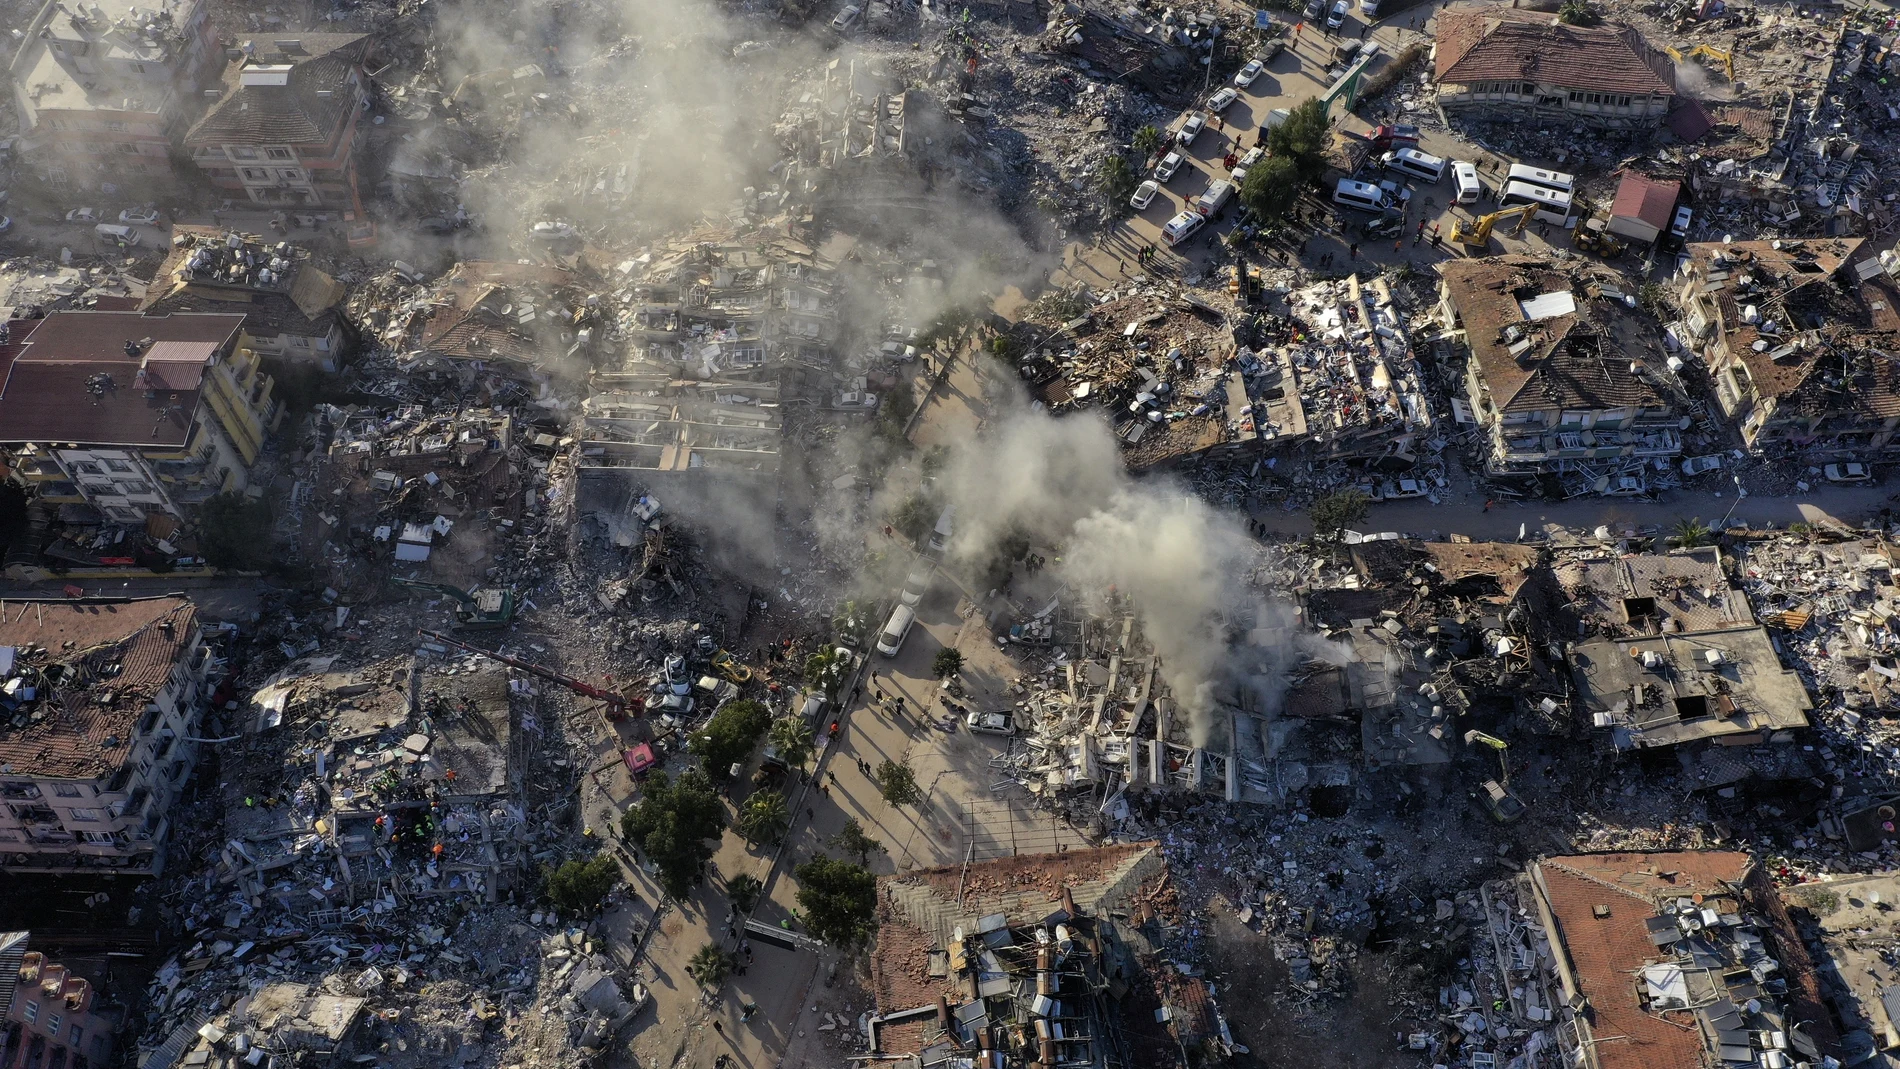 Destroyed buildings are seen from above in Antakya, southeastern Turkey, Thursday, Feb. 9, 2023. Thousands who lost their homes in a catastrophic earthquake huddled around campfires and clamored for food and water in the bitter cold, three days after the temblor and series of aftershocks hit Turkey and Syria. (AP Photo/Hussein Malla)